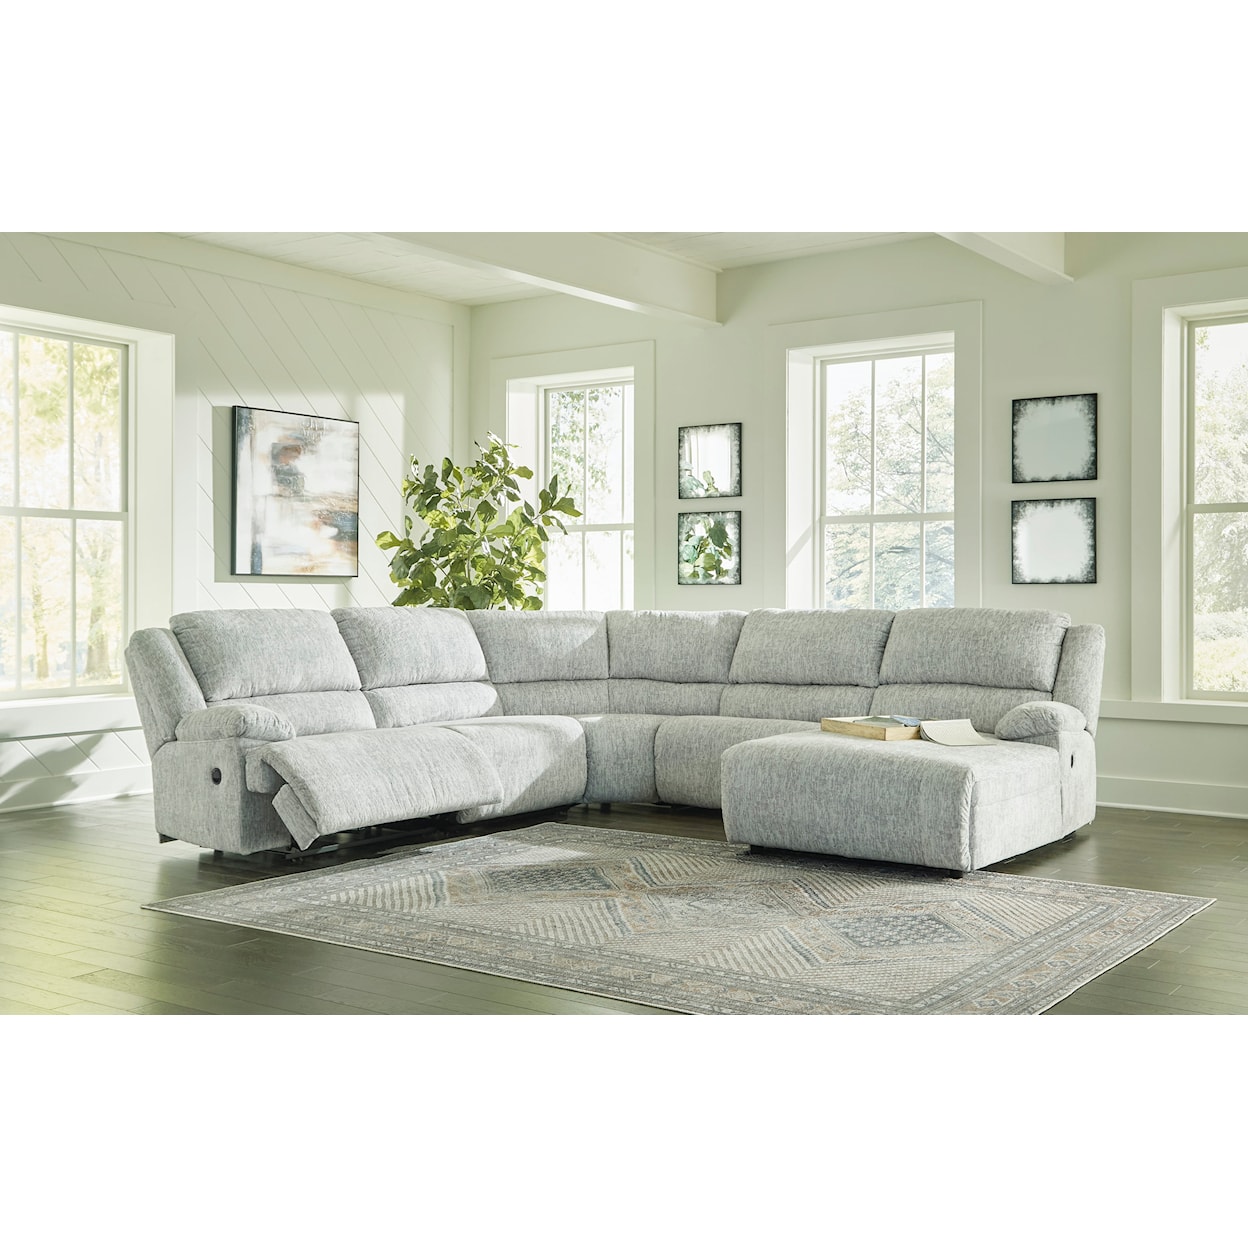 Signature Design McClelland 5-Piece Reclining Sectional with Chaise